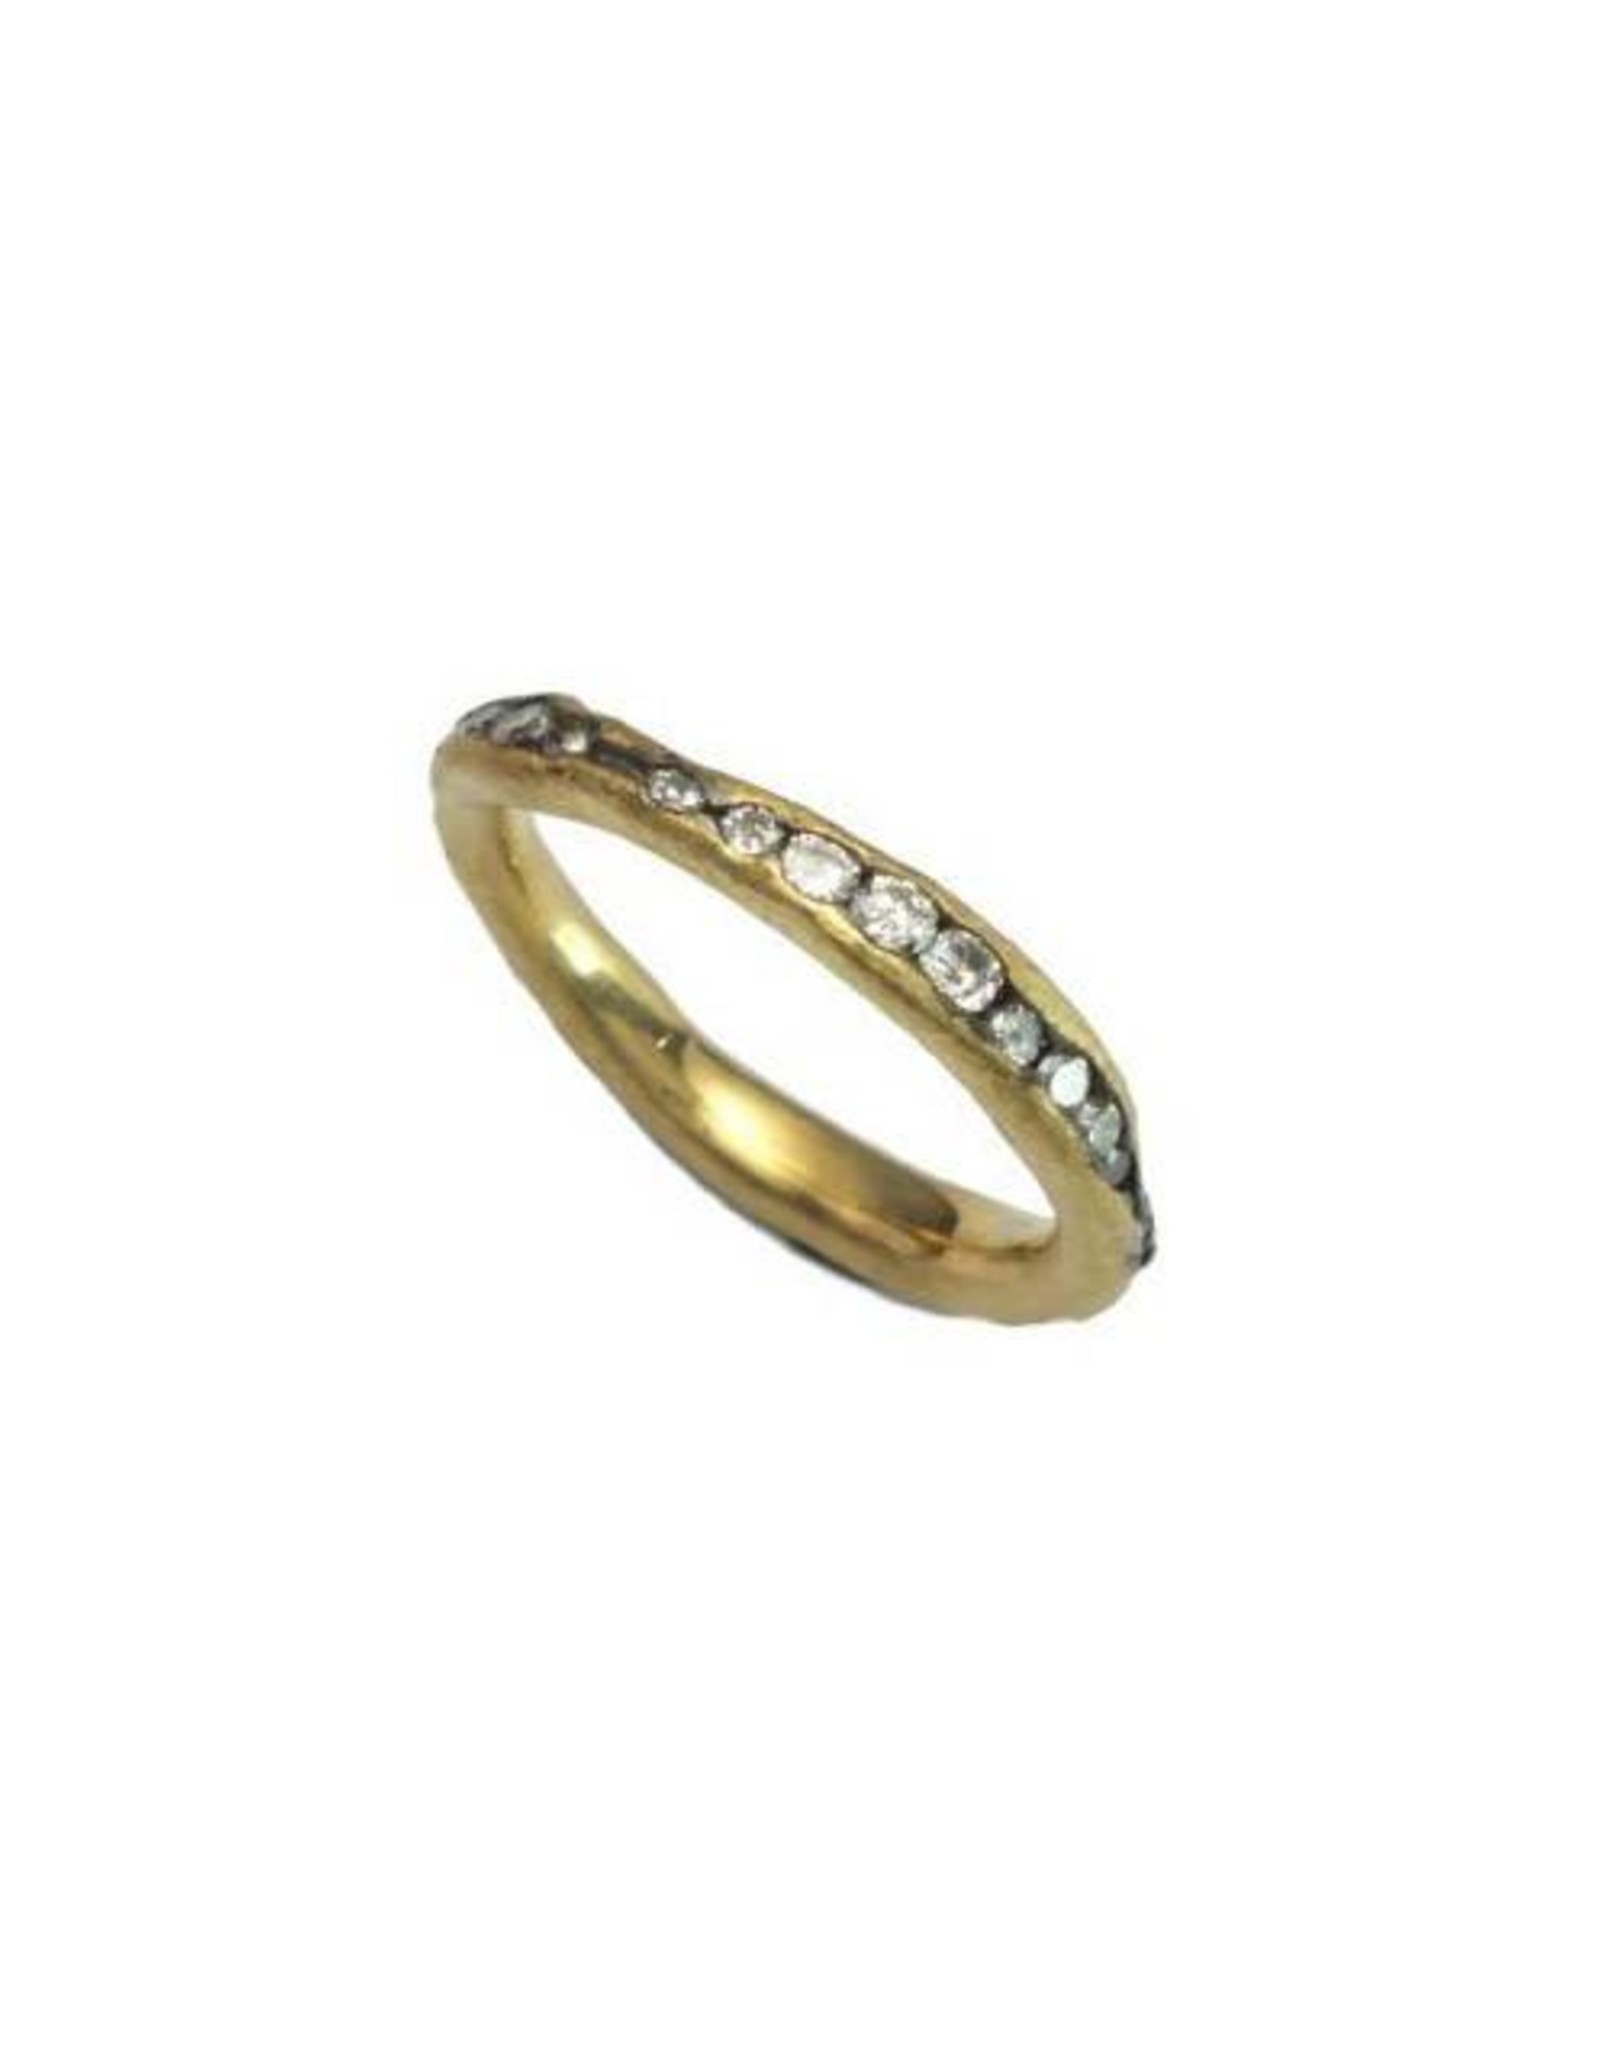 TAP by Todd Pownell Gold Irregular Channel Ring with Diamonds